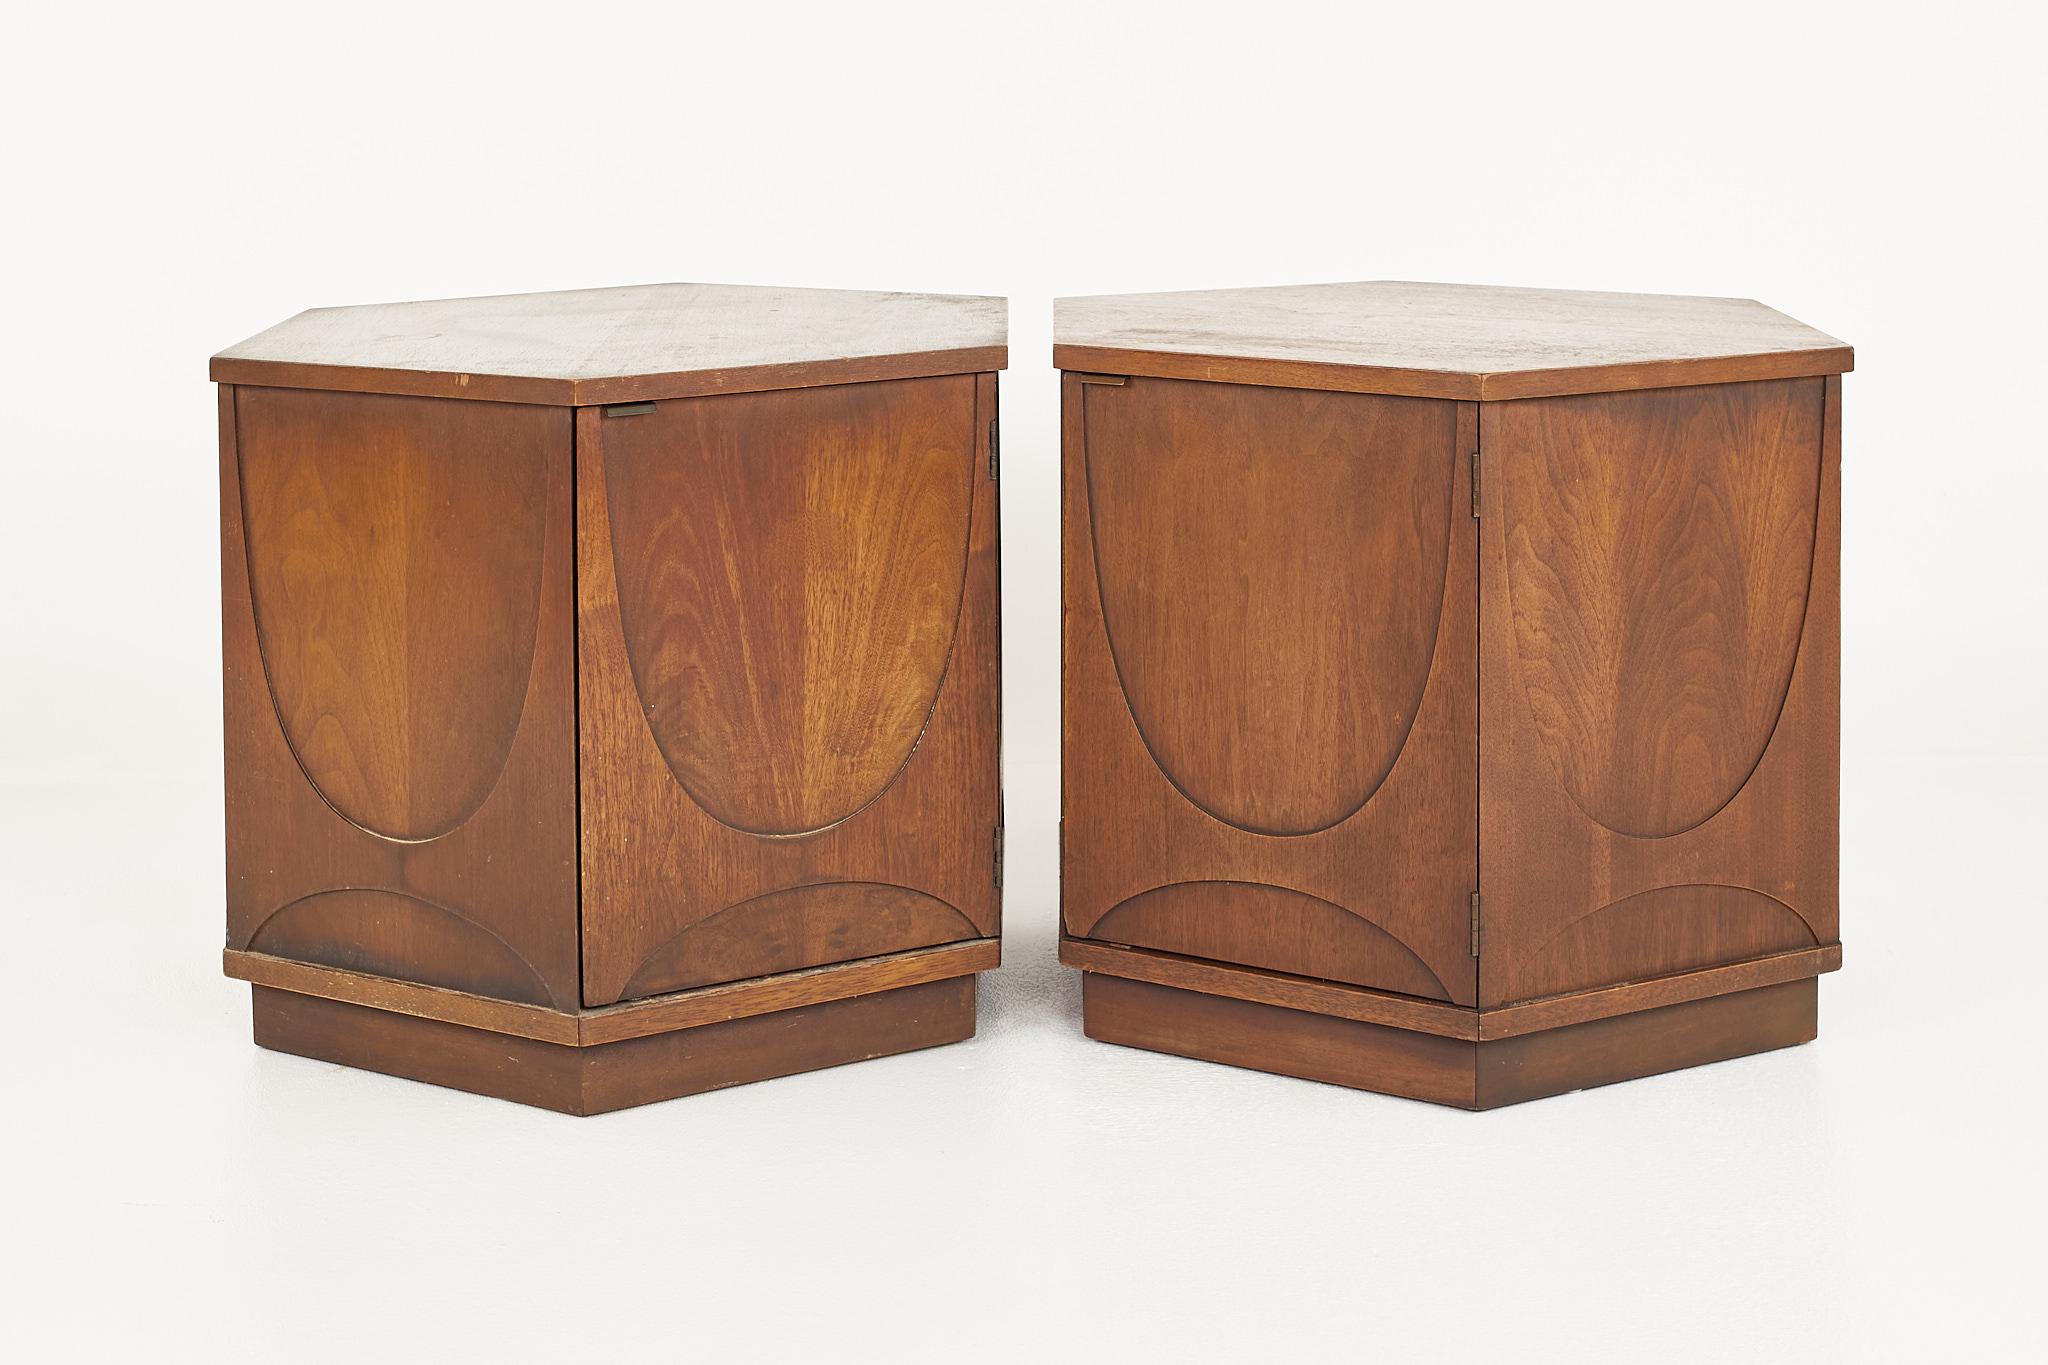 Broyhill Brasilia mid century hexagon side end table cabinet - pair

Each side table measures: 28 wide x 24 deep x 21.5 inches high

?All pieces of furniture can be had in what we call restored vintage condition. That means the piece is restored